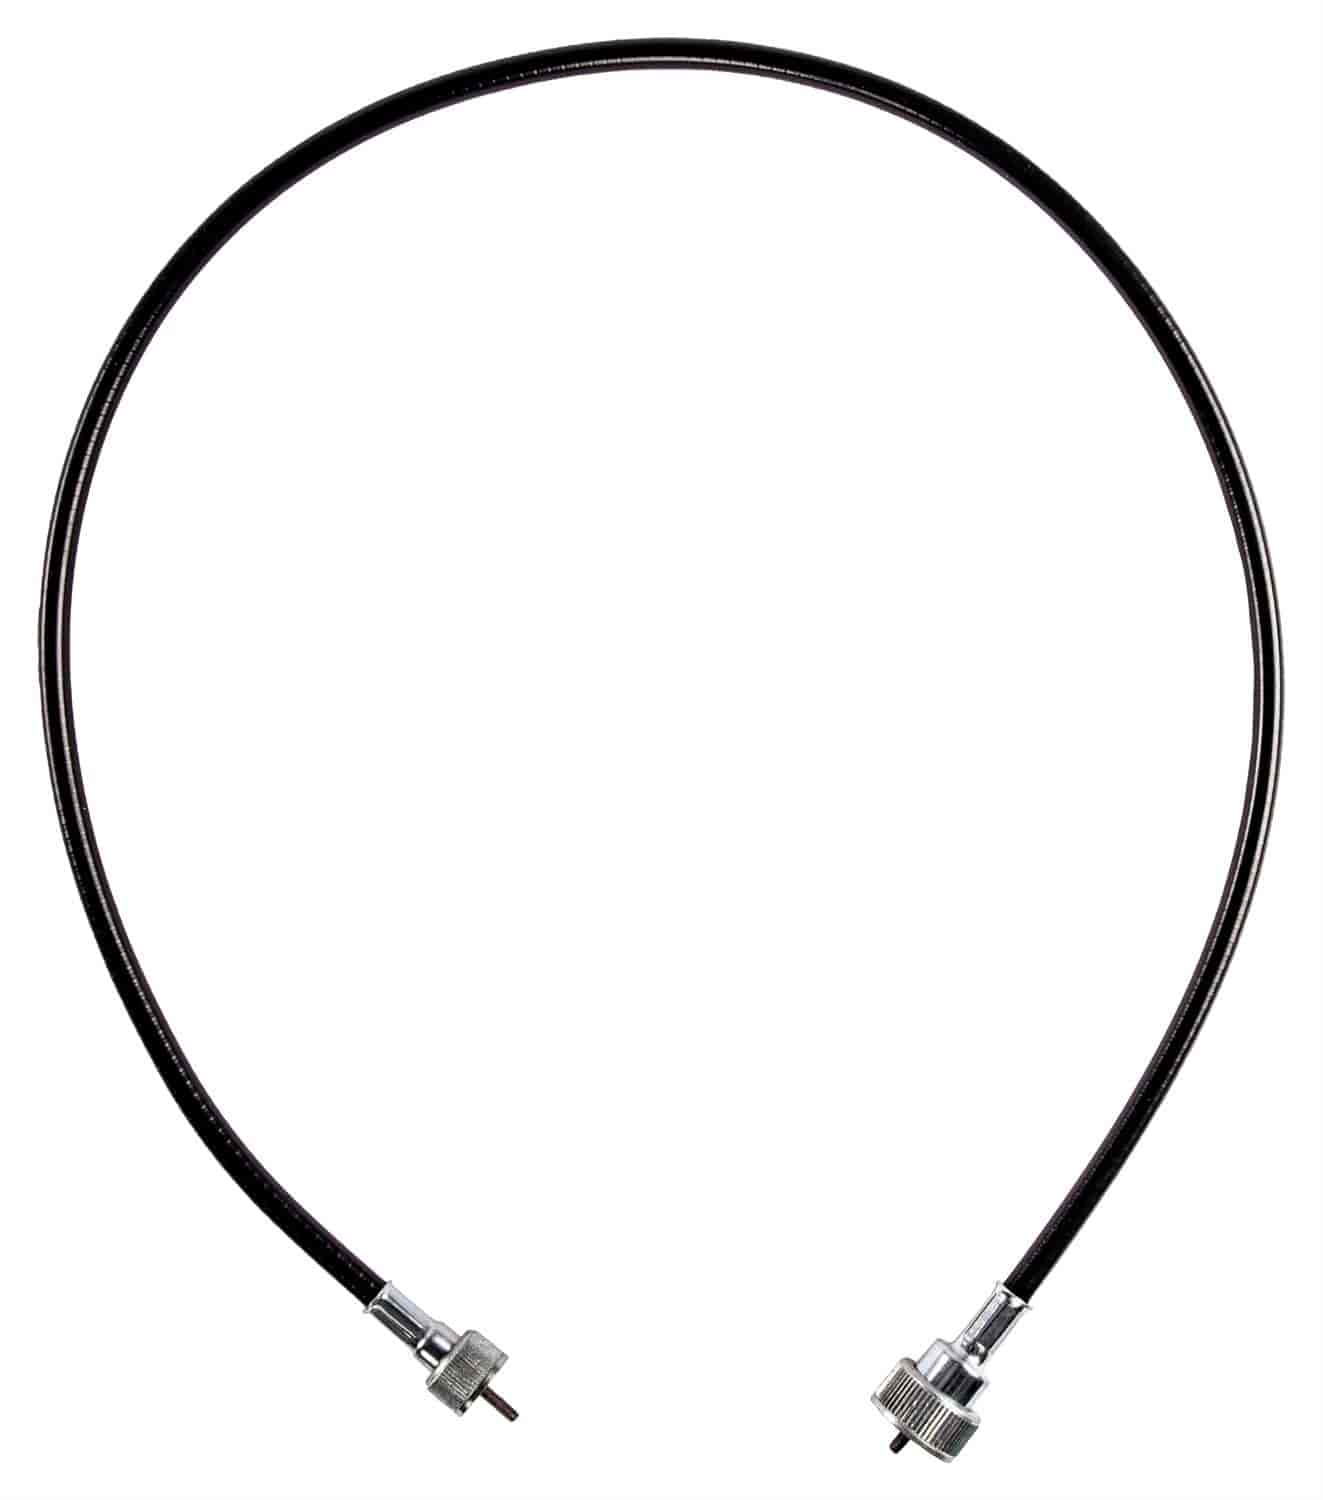 Ford Style Speedometer Cable Assembly [Internal Thread]